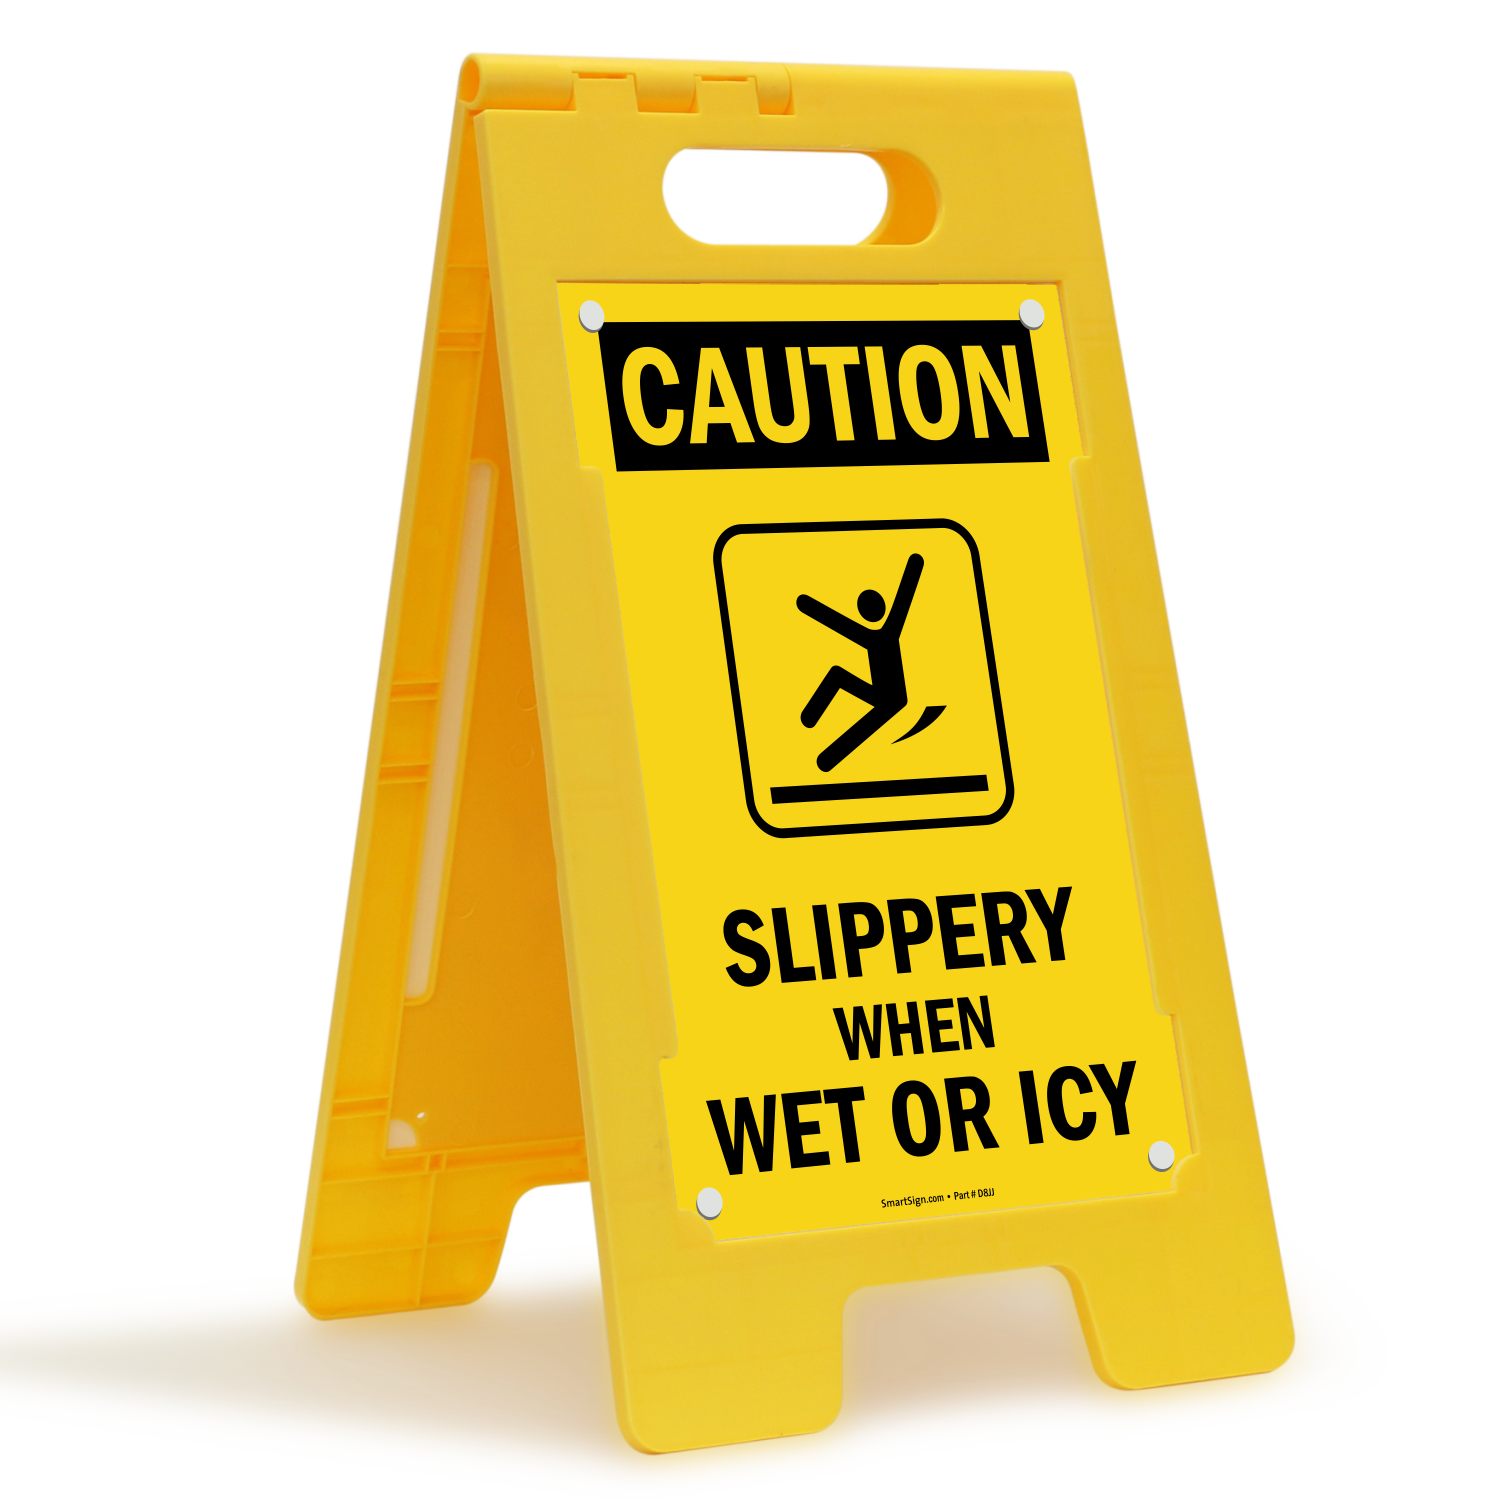 https://images.mysafetysign.com/img/lg/S/slippery-when-wet-icy-sign-sf-0354.png